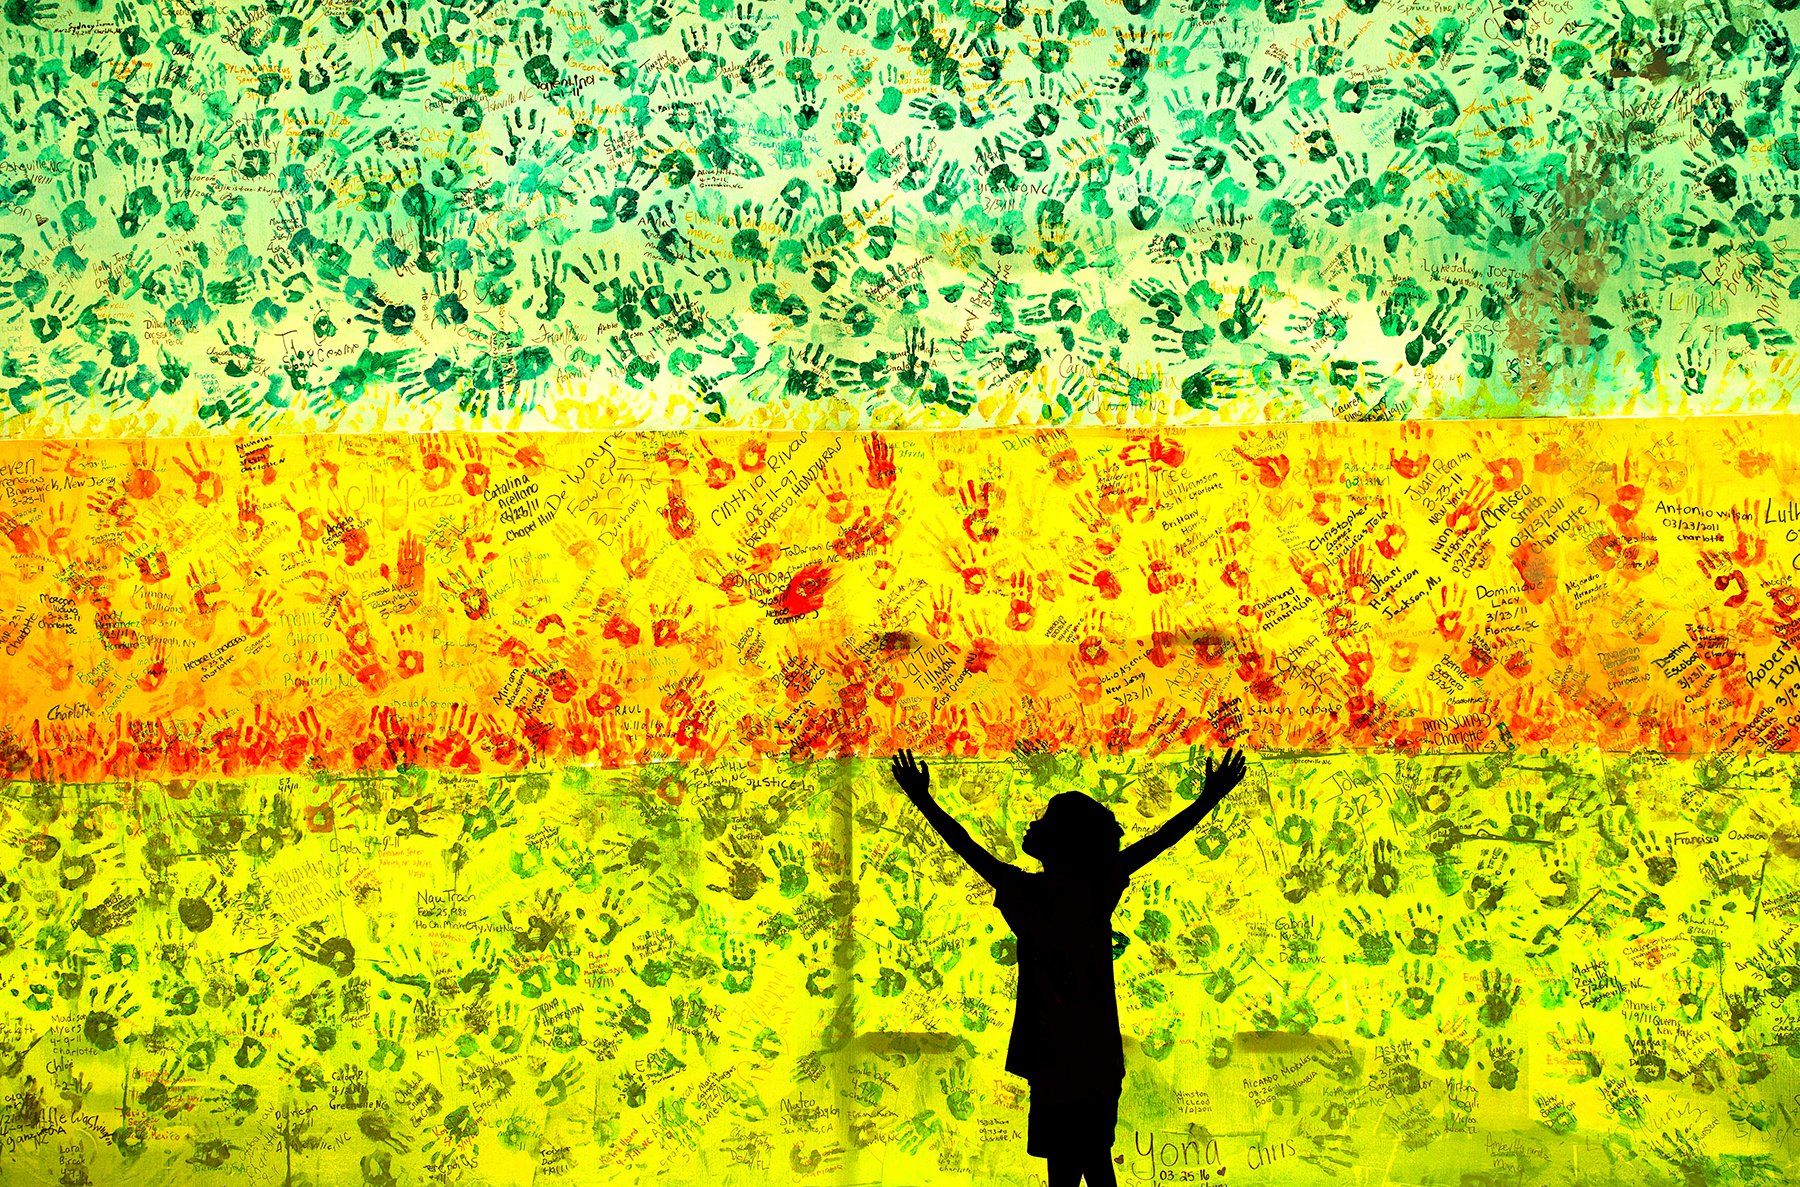 A child's silhouette in front of a colorful wall of hand prints